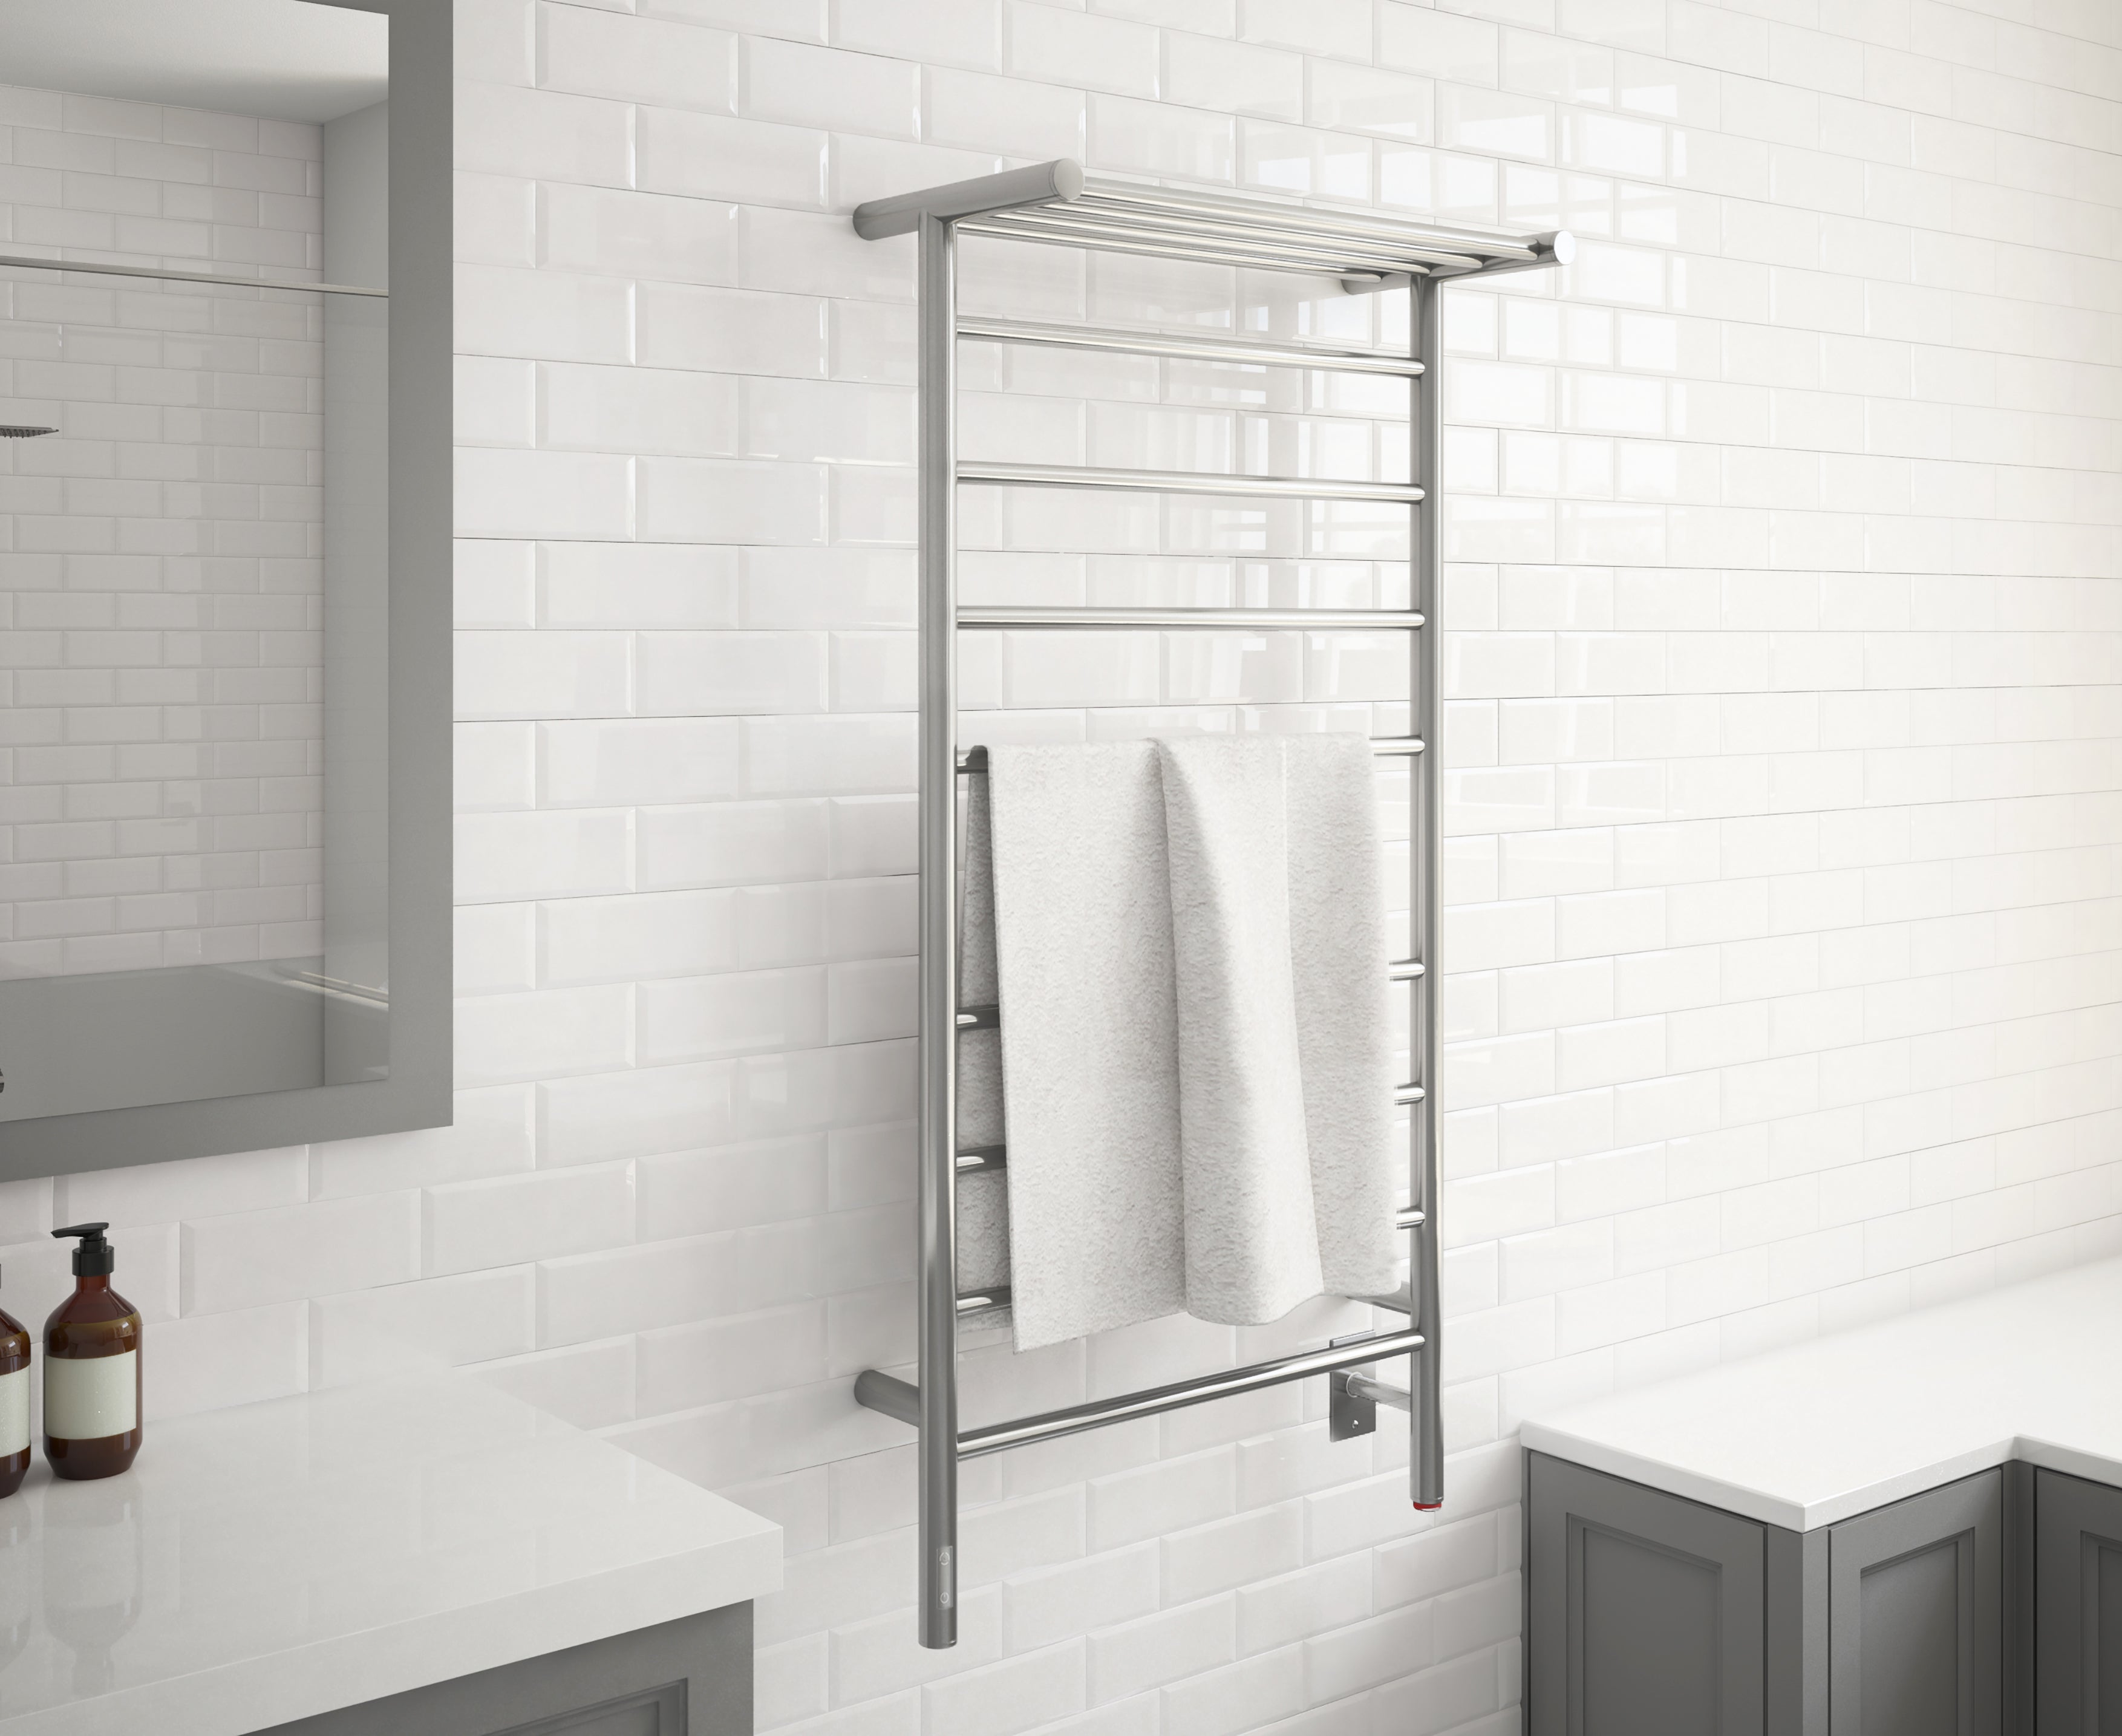 Piazzo OBT - 8 Bar Dual Wall Mount Towel Warmer with Integrated On-Board Timer in Polished Stainless Steel